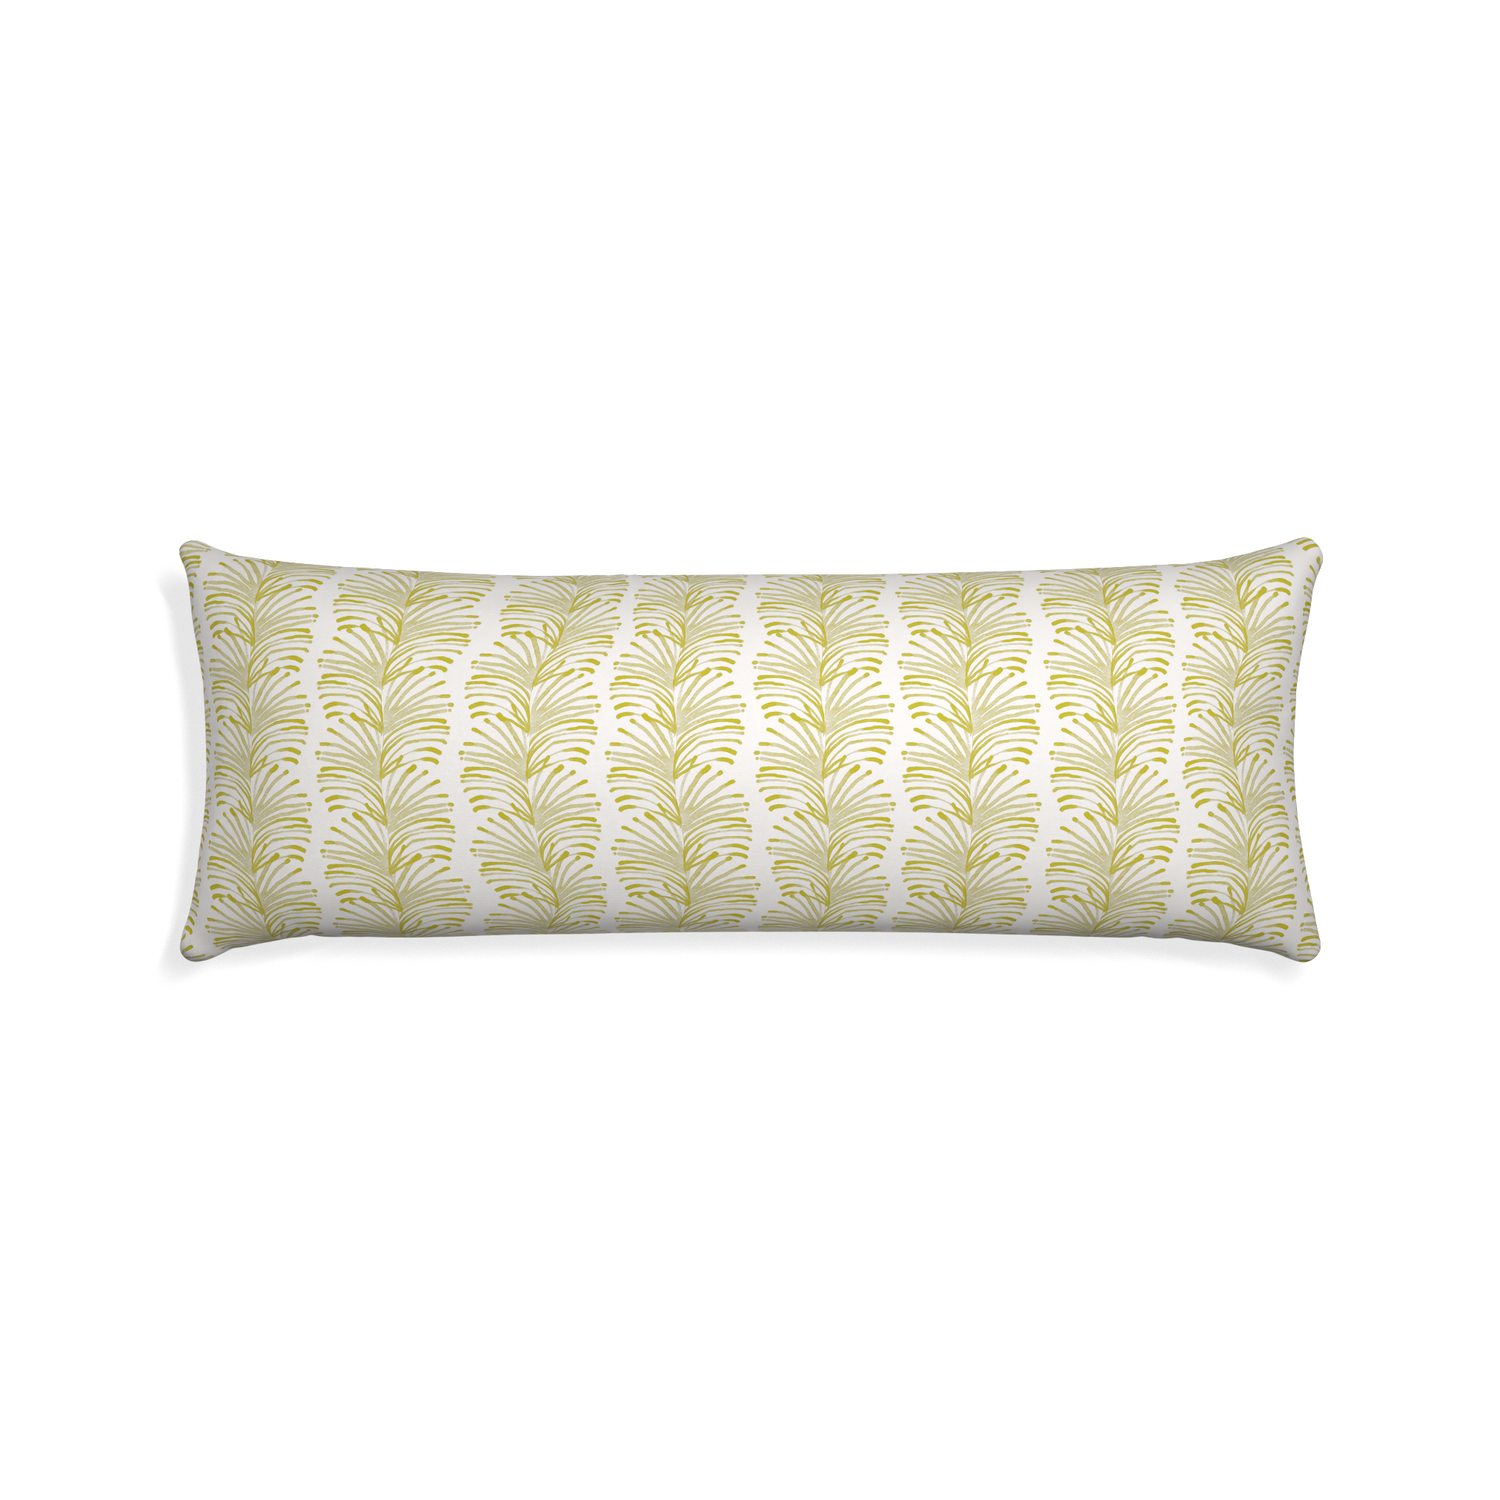 Xl-lumbar emma chartreuse custom yellow stripe chartreusepillow with none on white background